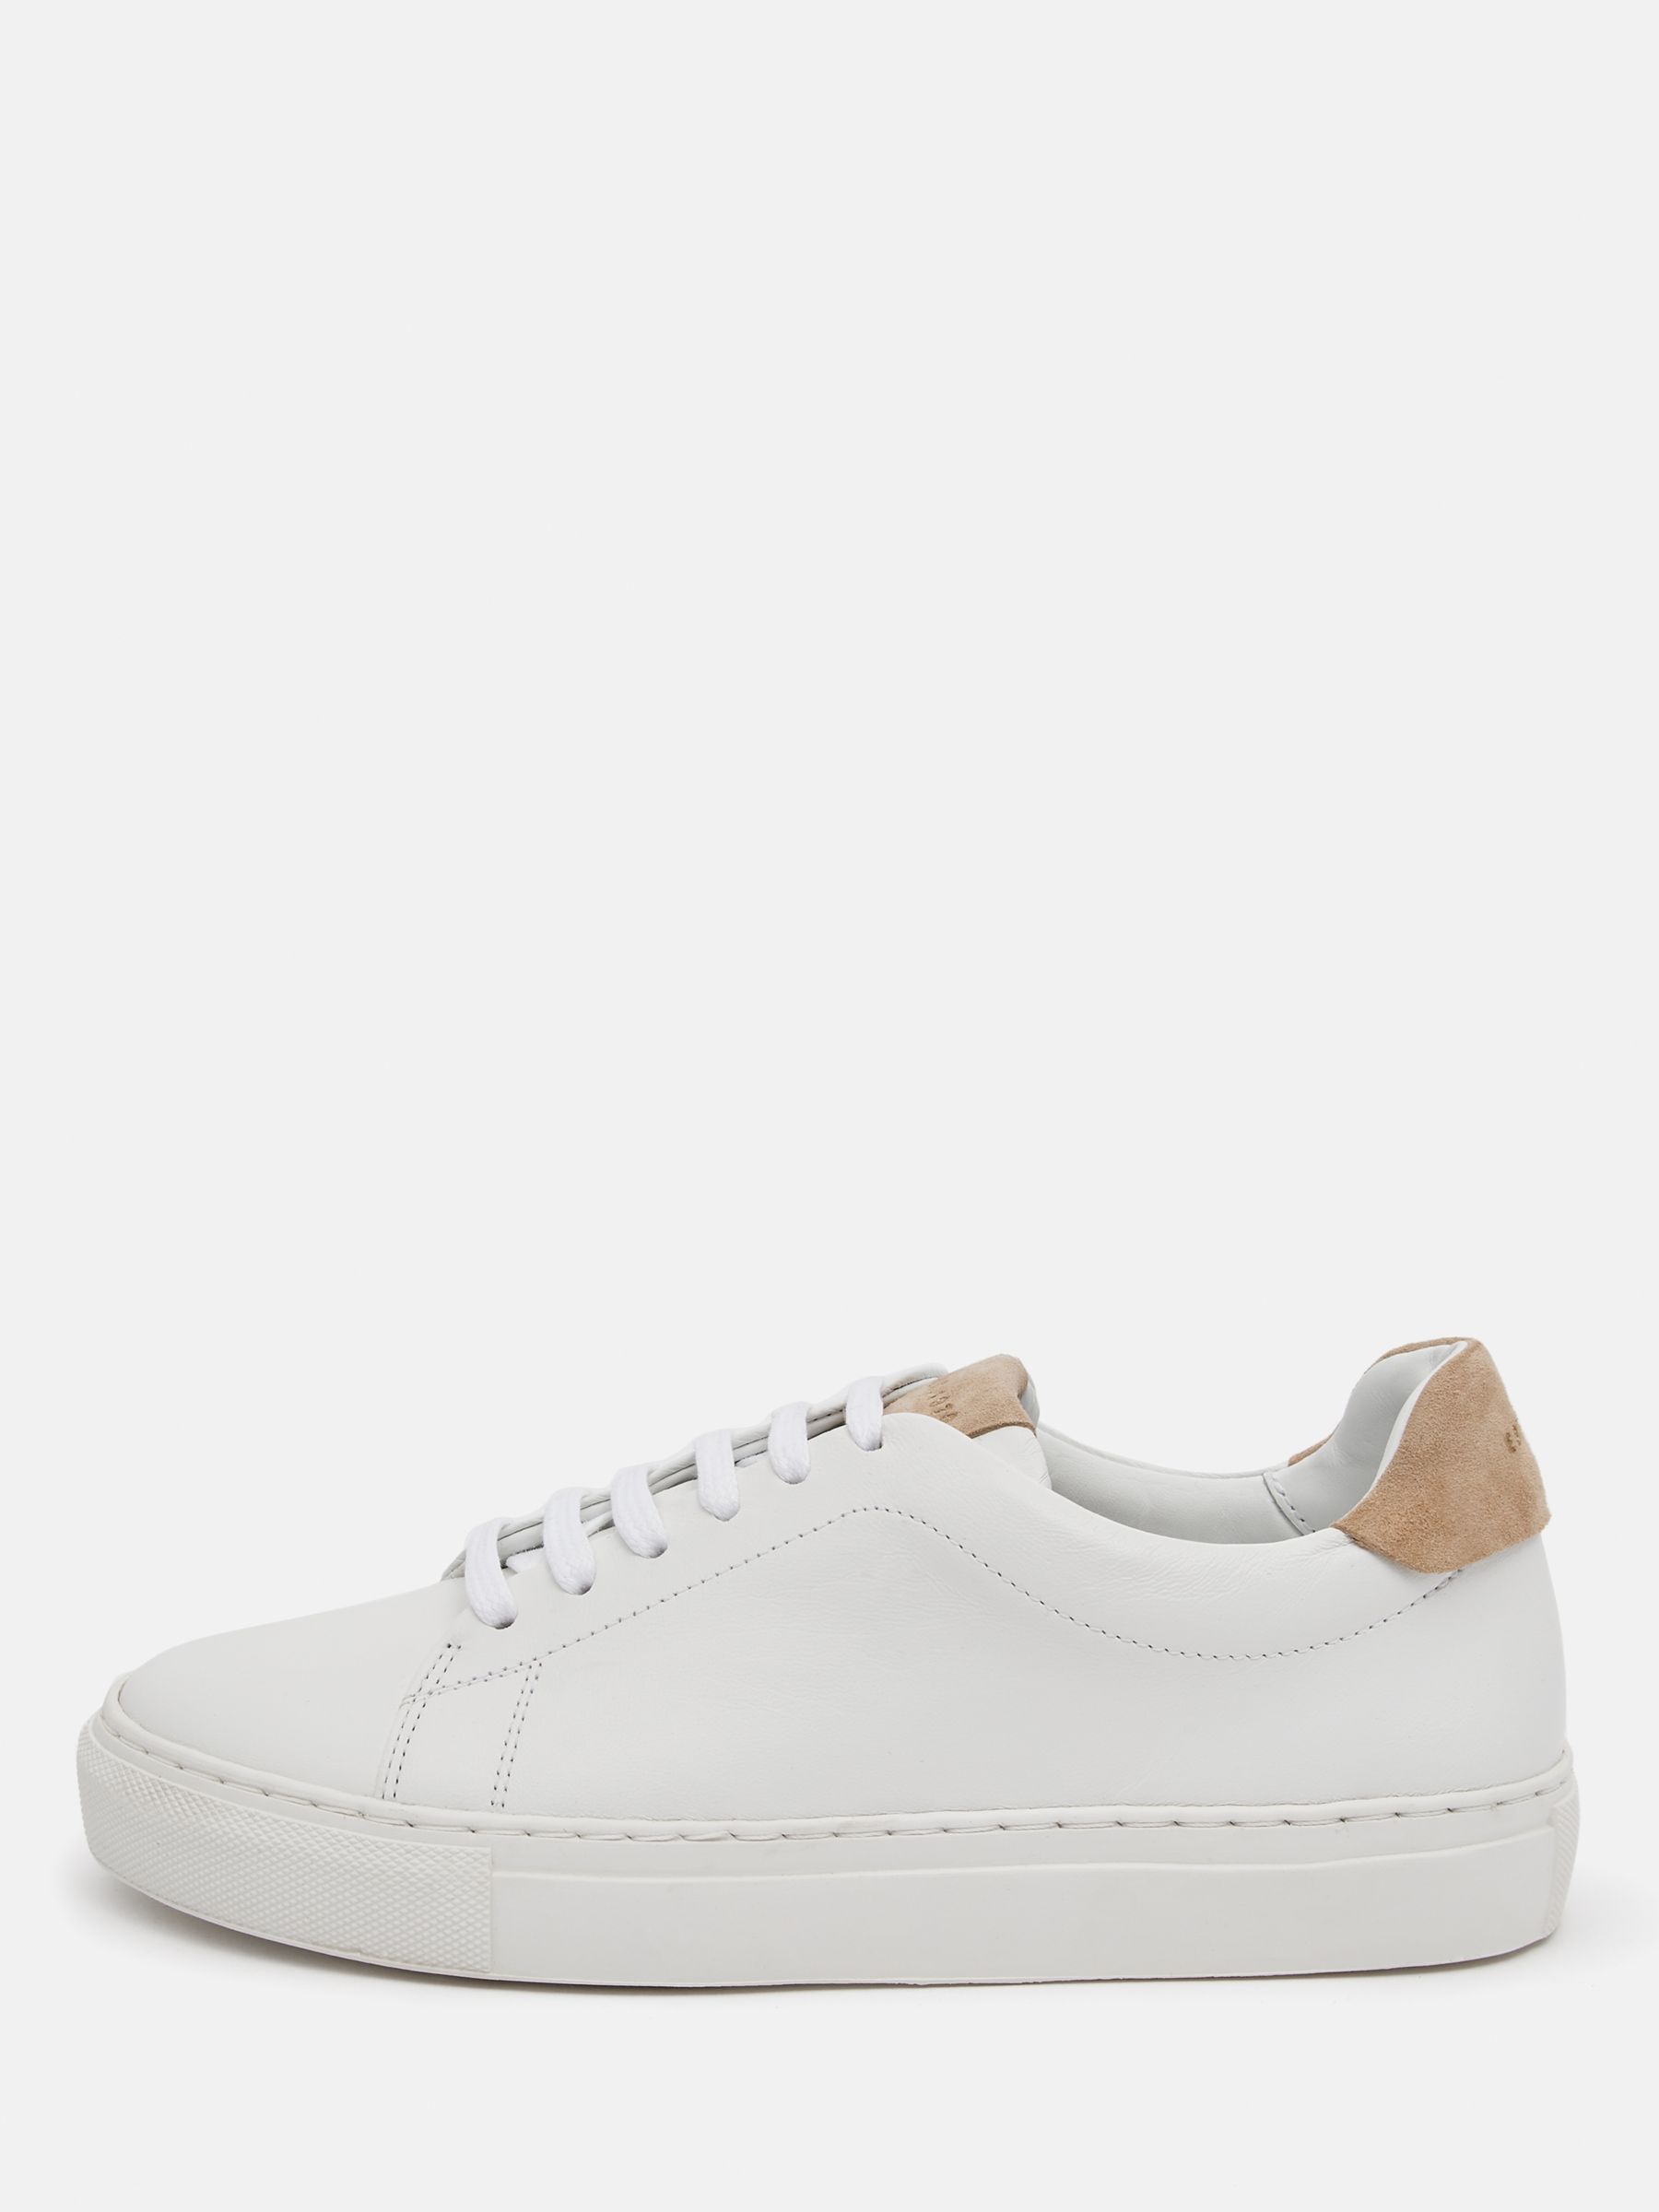 Jigsaw Miah Low Top Leather Trainers, White at John Lewis & Partners